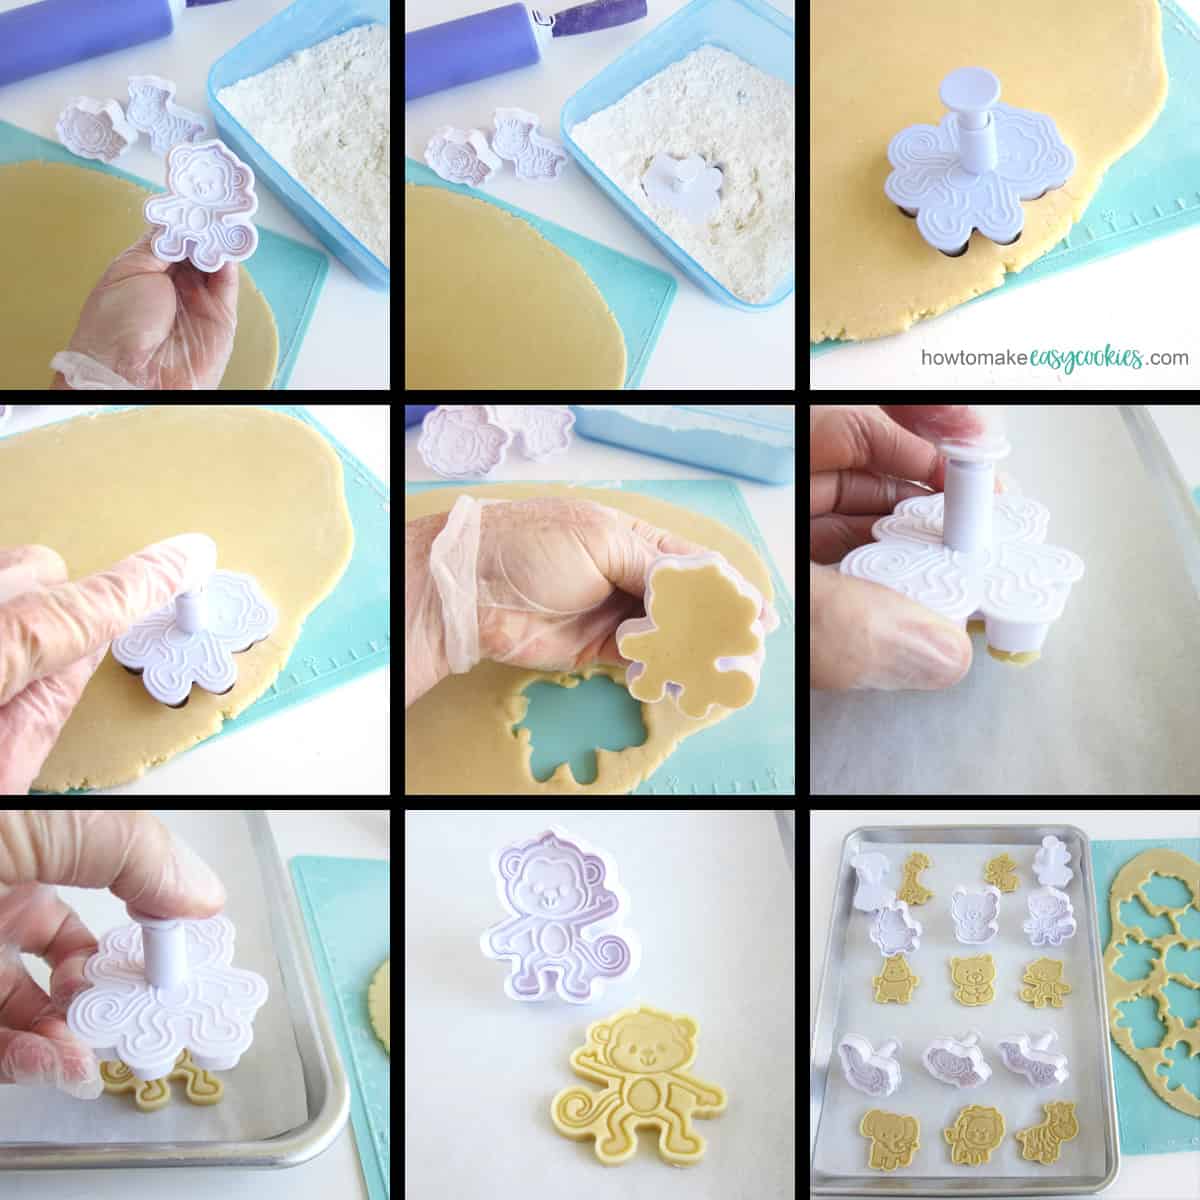 cutting out sugar cookie dough using a plunger cookie cutter with a stamped image of a monkey